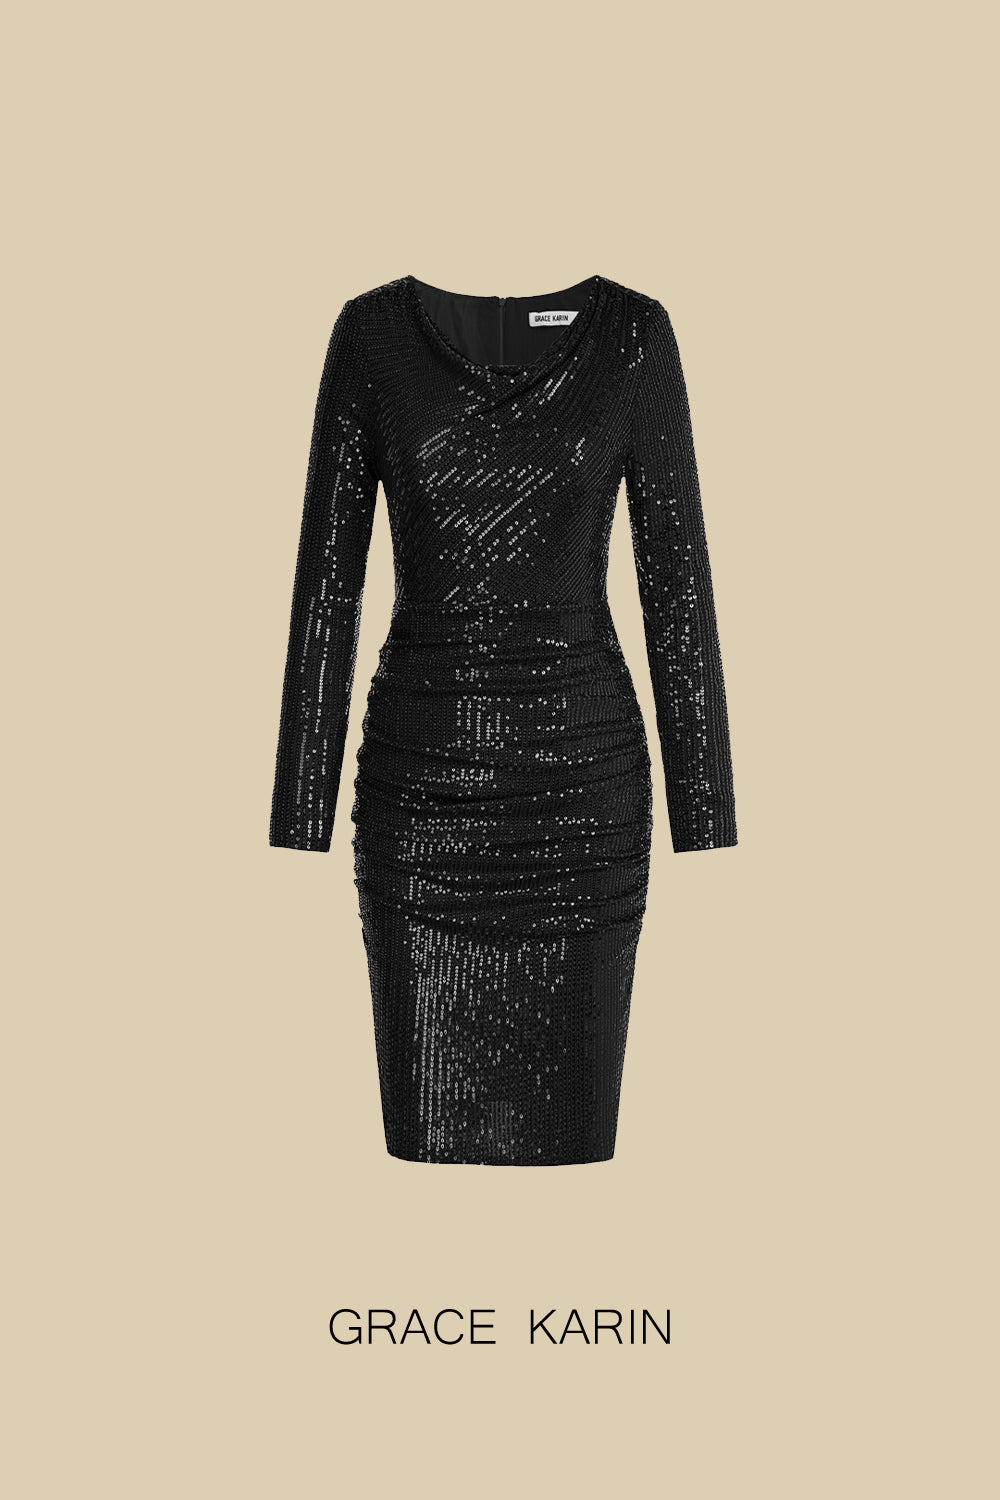 GK Women Sequined Party Dress Long Sleeve Cowl Neck Ruched Bodycon Dress